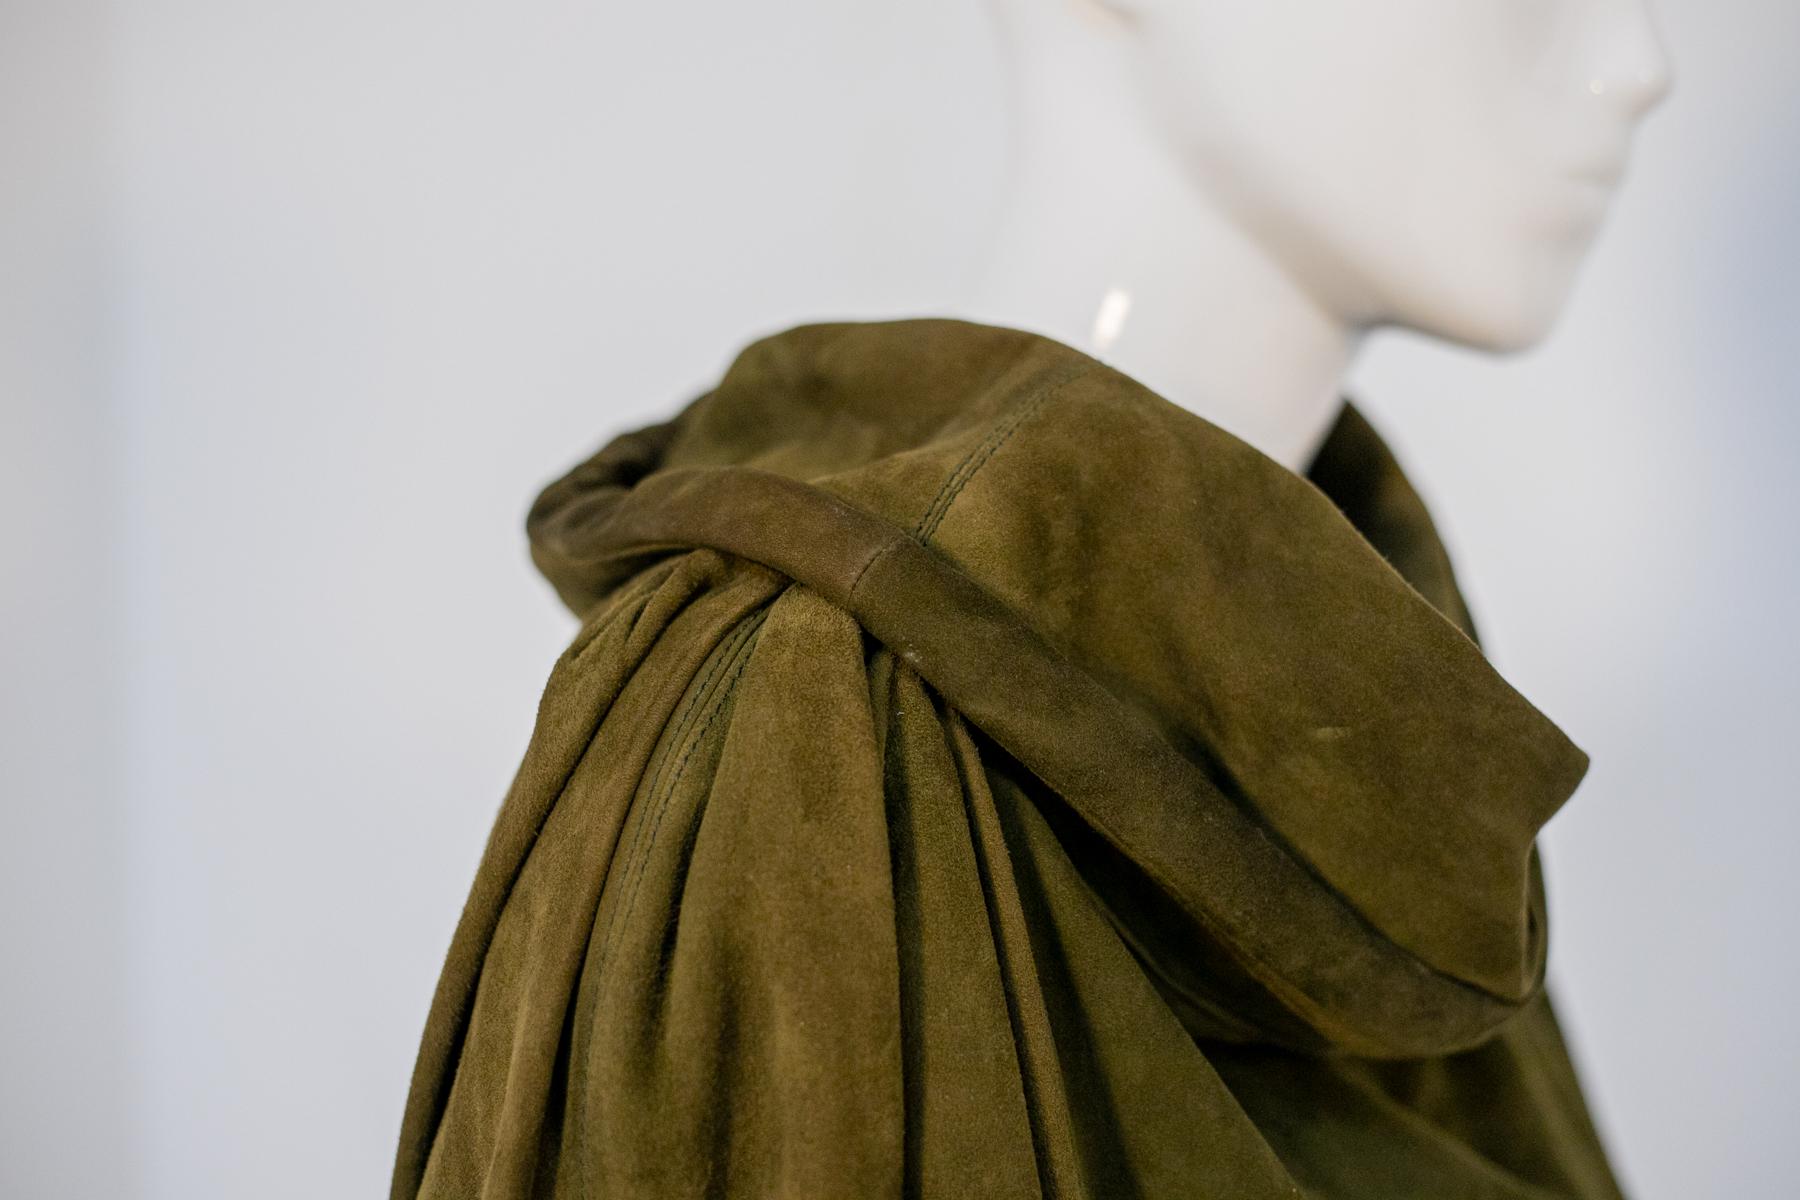 Particular vintage coat designed in the 1990s, made in Italy.
The coat is totally made of very beautiful and elegant olive green suede, with very soft long sleeves.
The collar is the highlight of the coat: in fact, it does not have the classic open